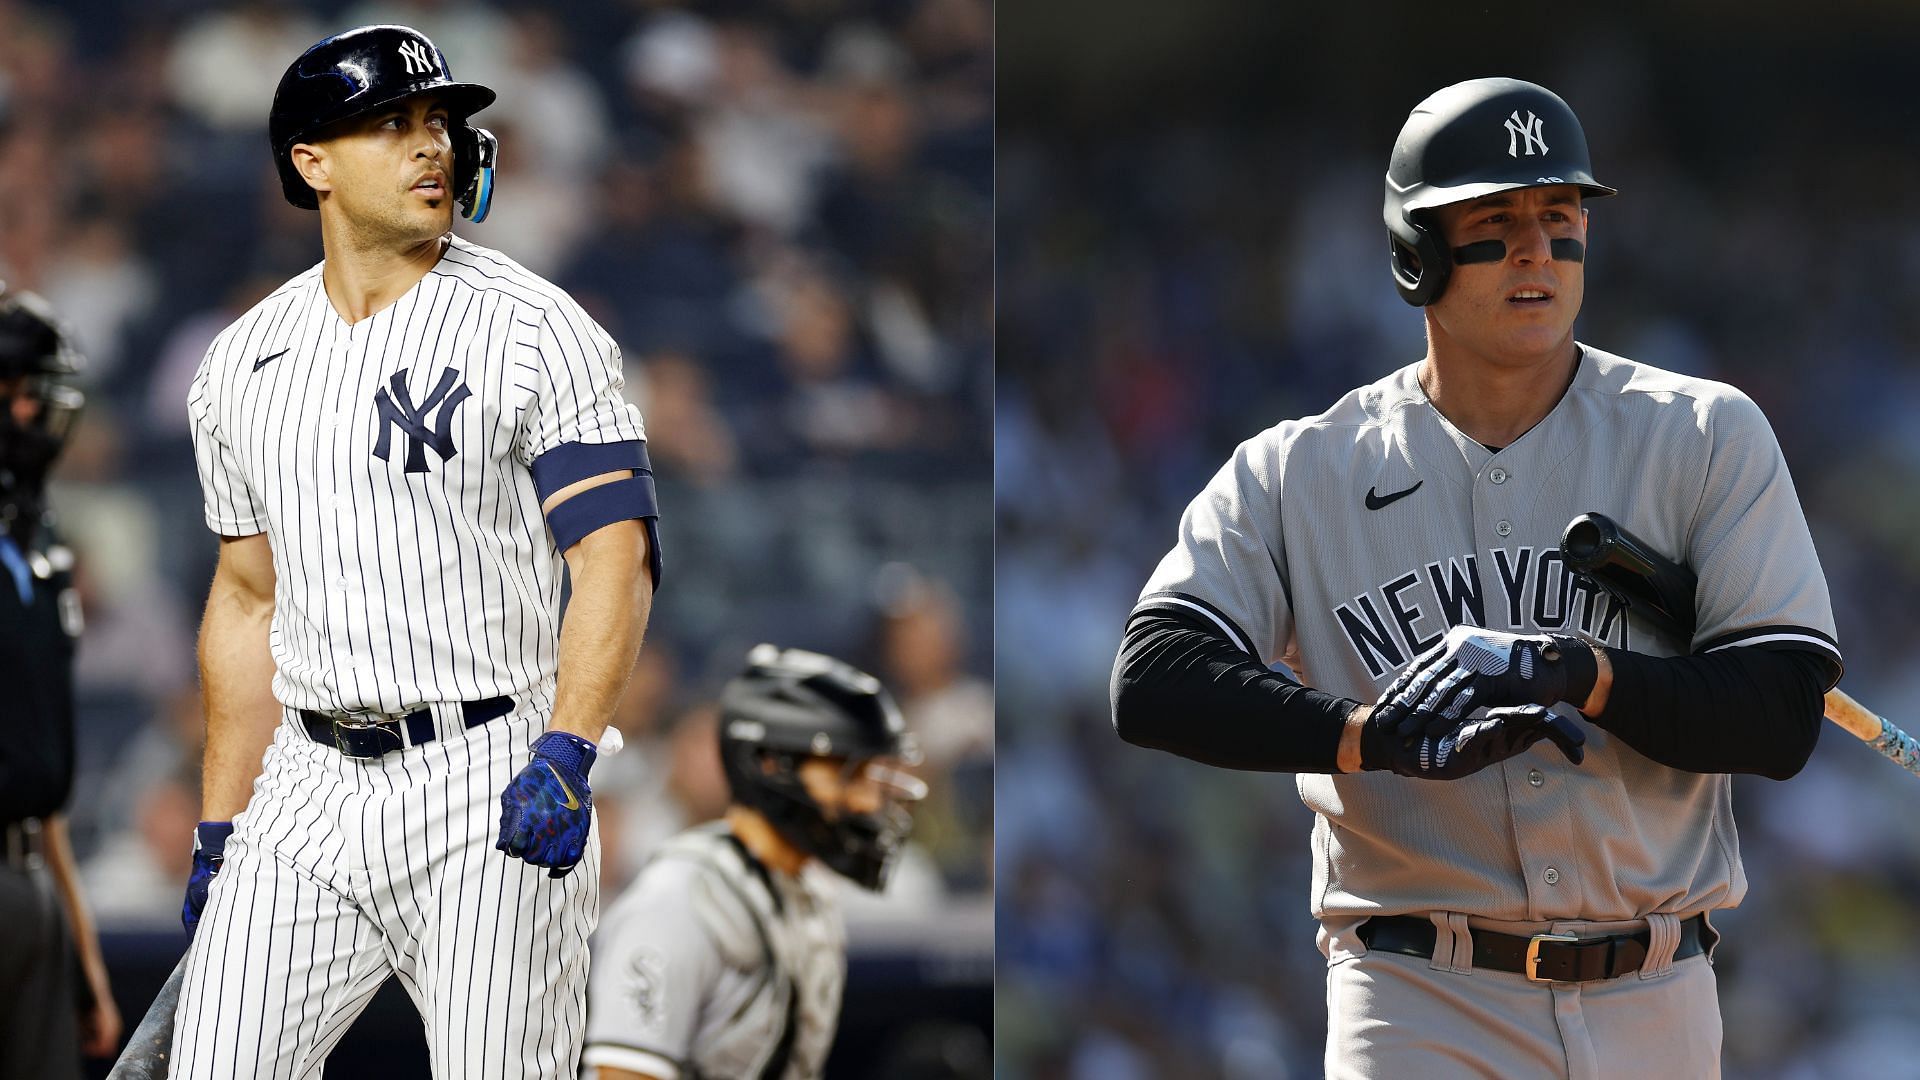 Giancarlo Stanton and Anthony Rizzo are two players who have been identified as contributing to the New York Yankees